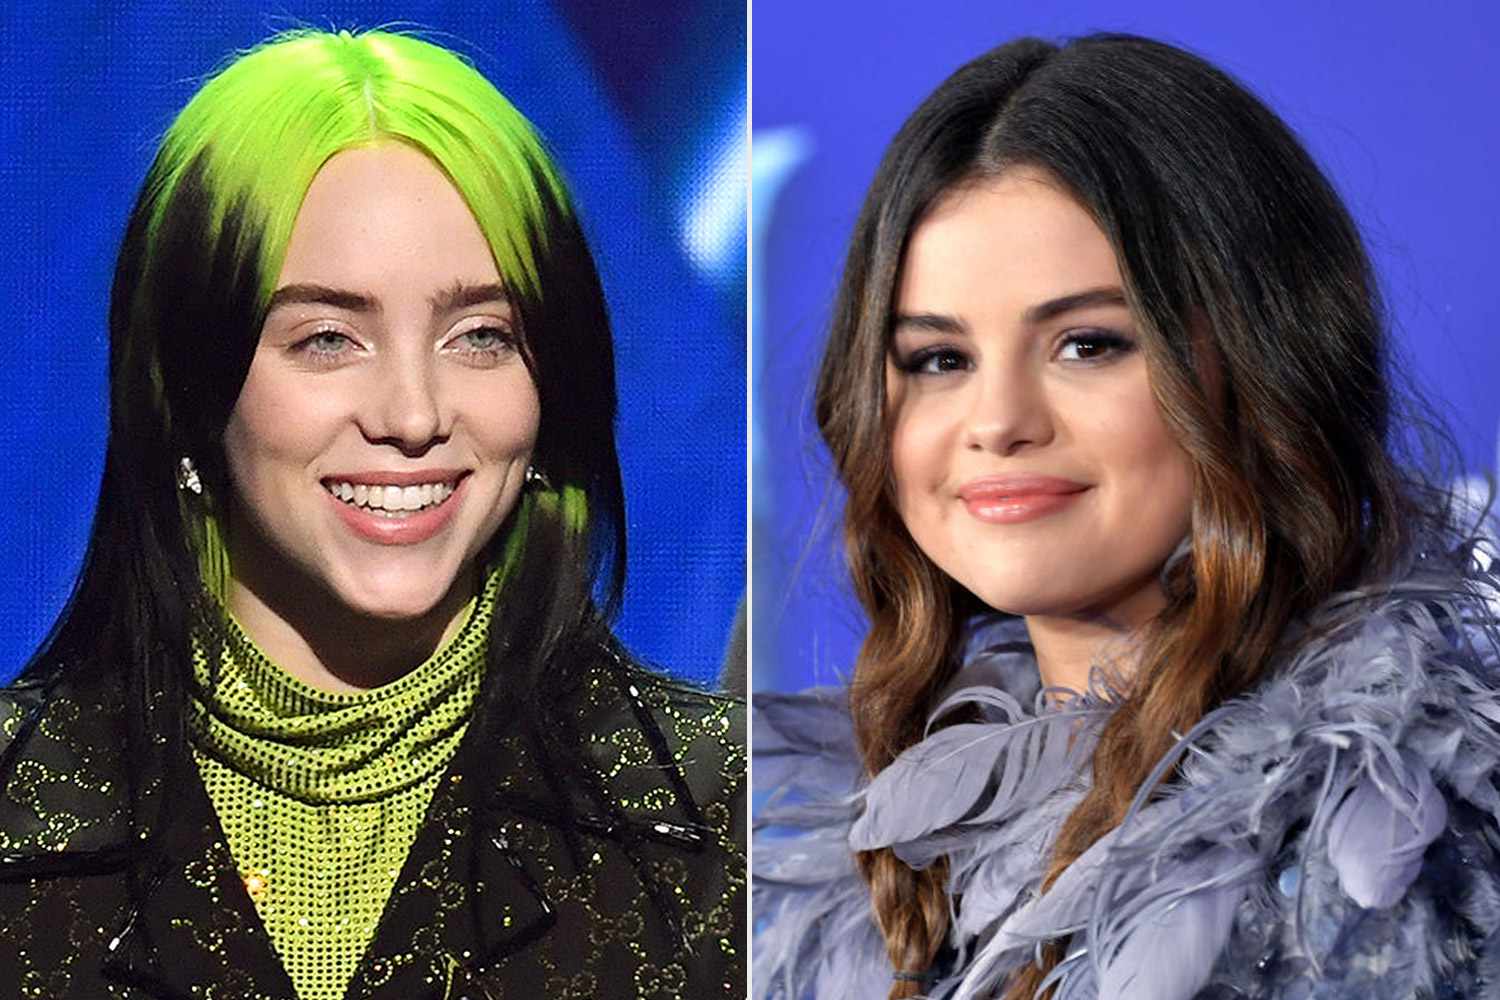 Selena Gomez Fangirls Over Billie Eilish Wearing Rare Beauty in Vanity Fair : 'Low Key Freaking Out' - Yahoo Entertainment